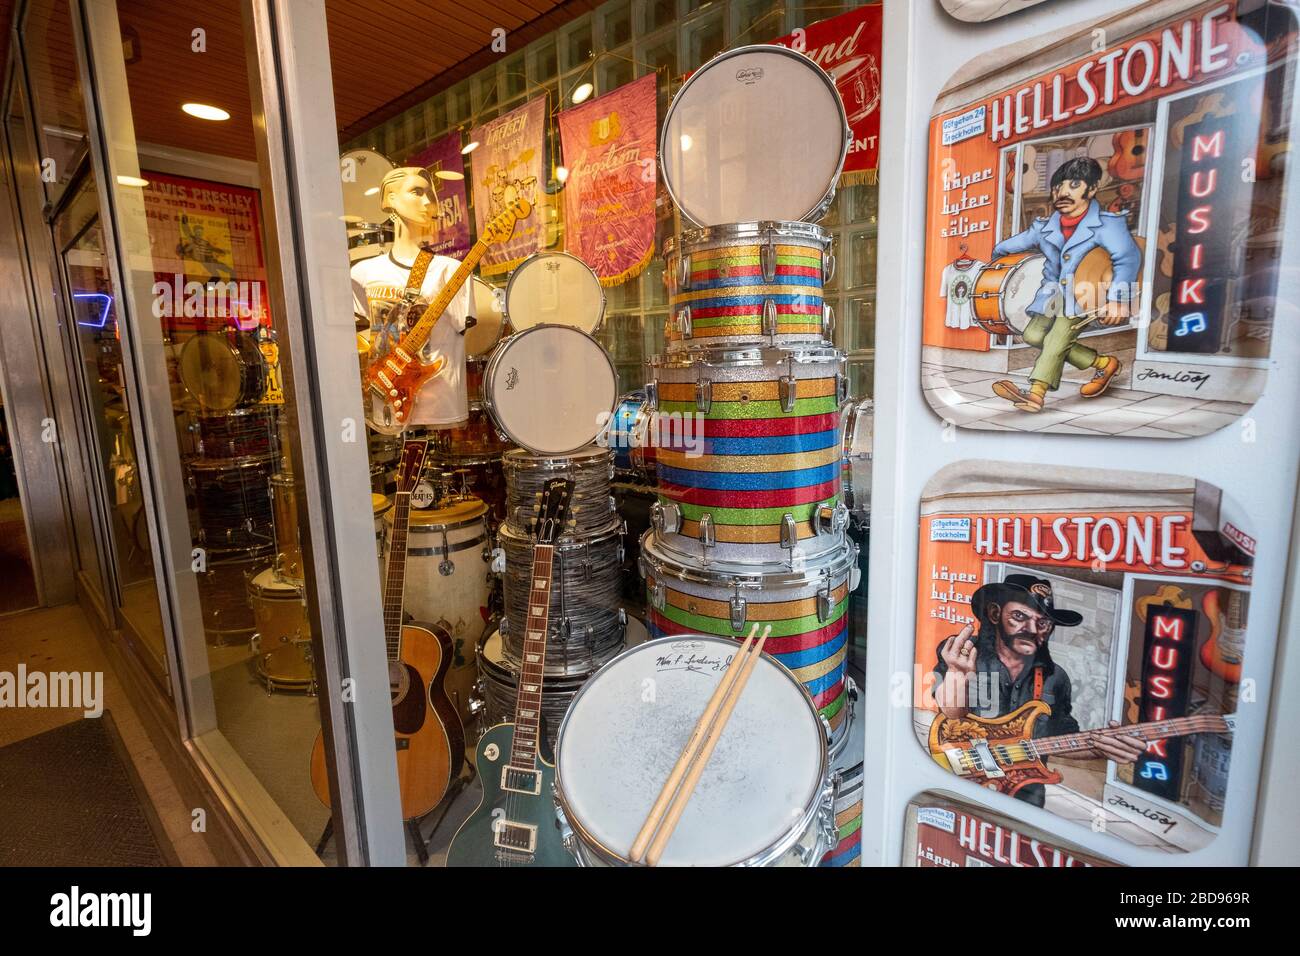 Hellstone music store in Stockholm, Sweden, Europe Stock Photo